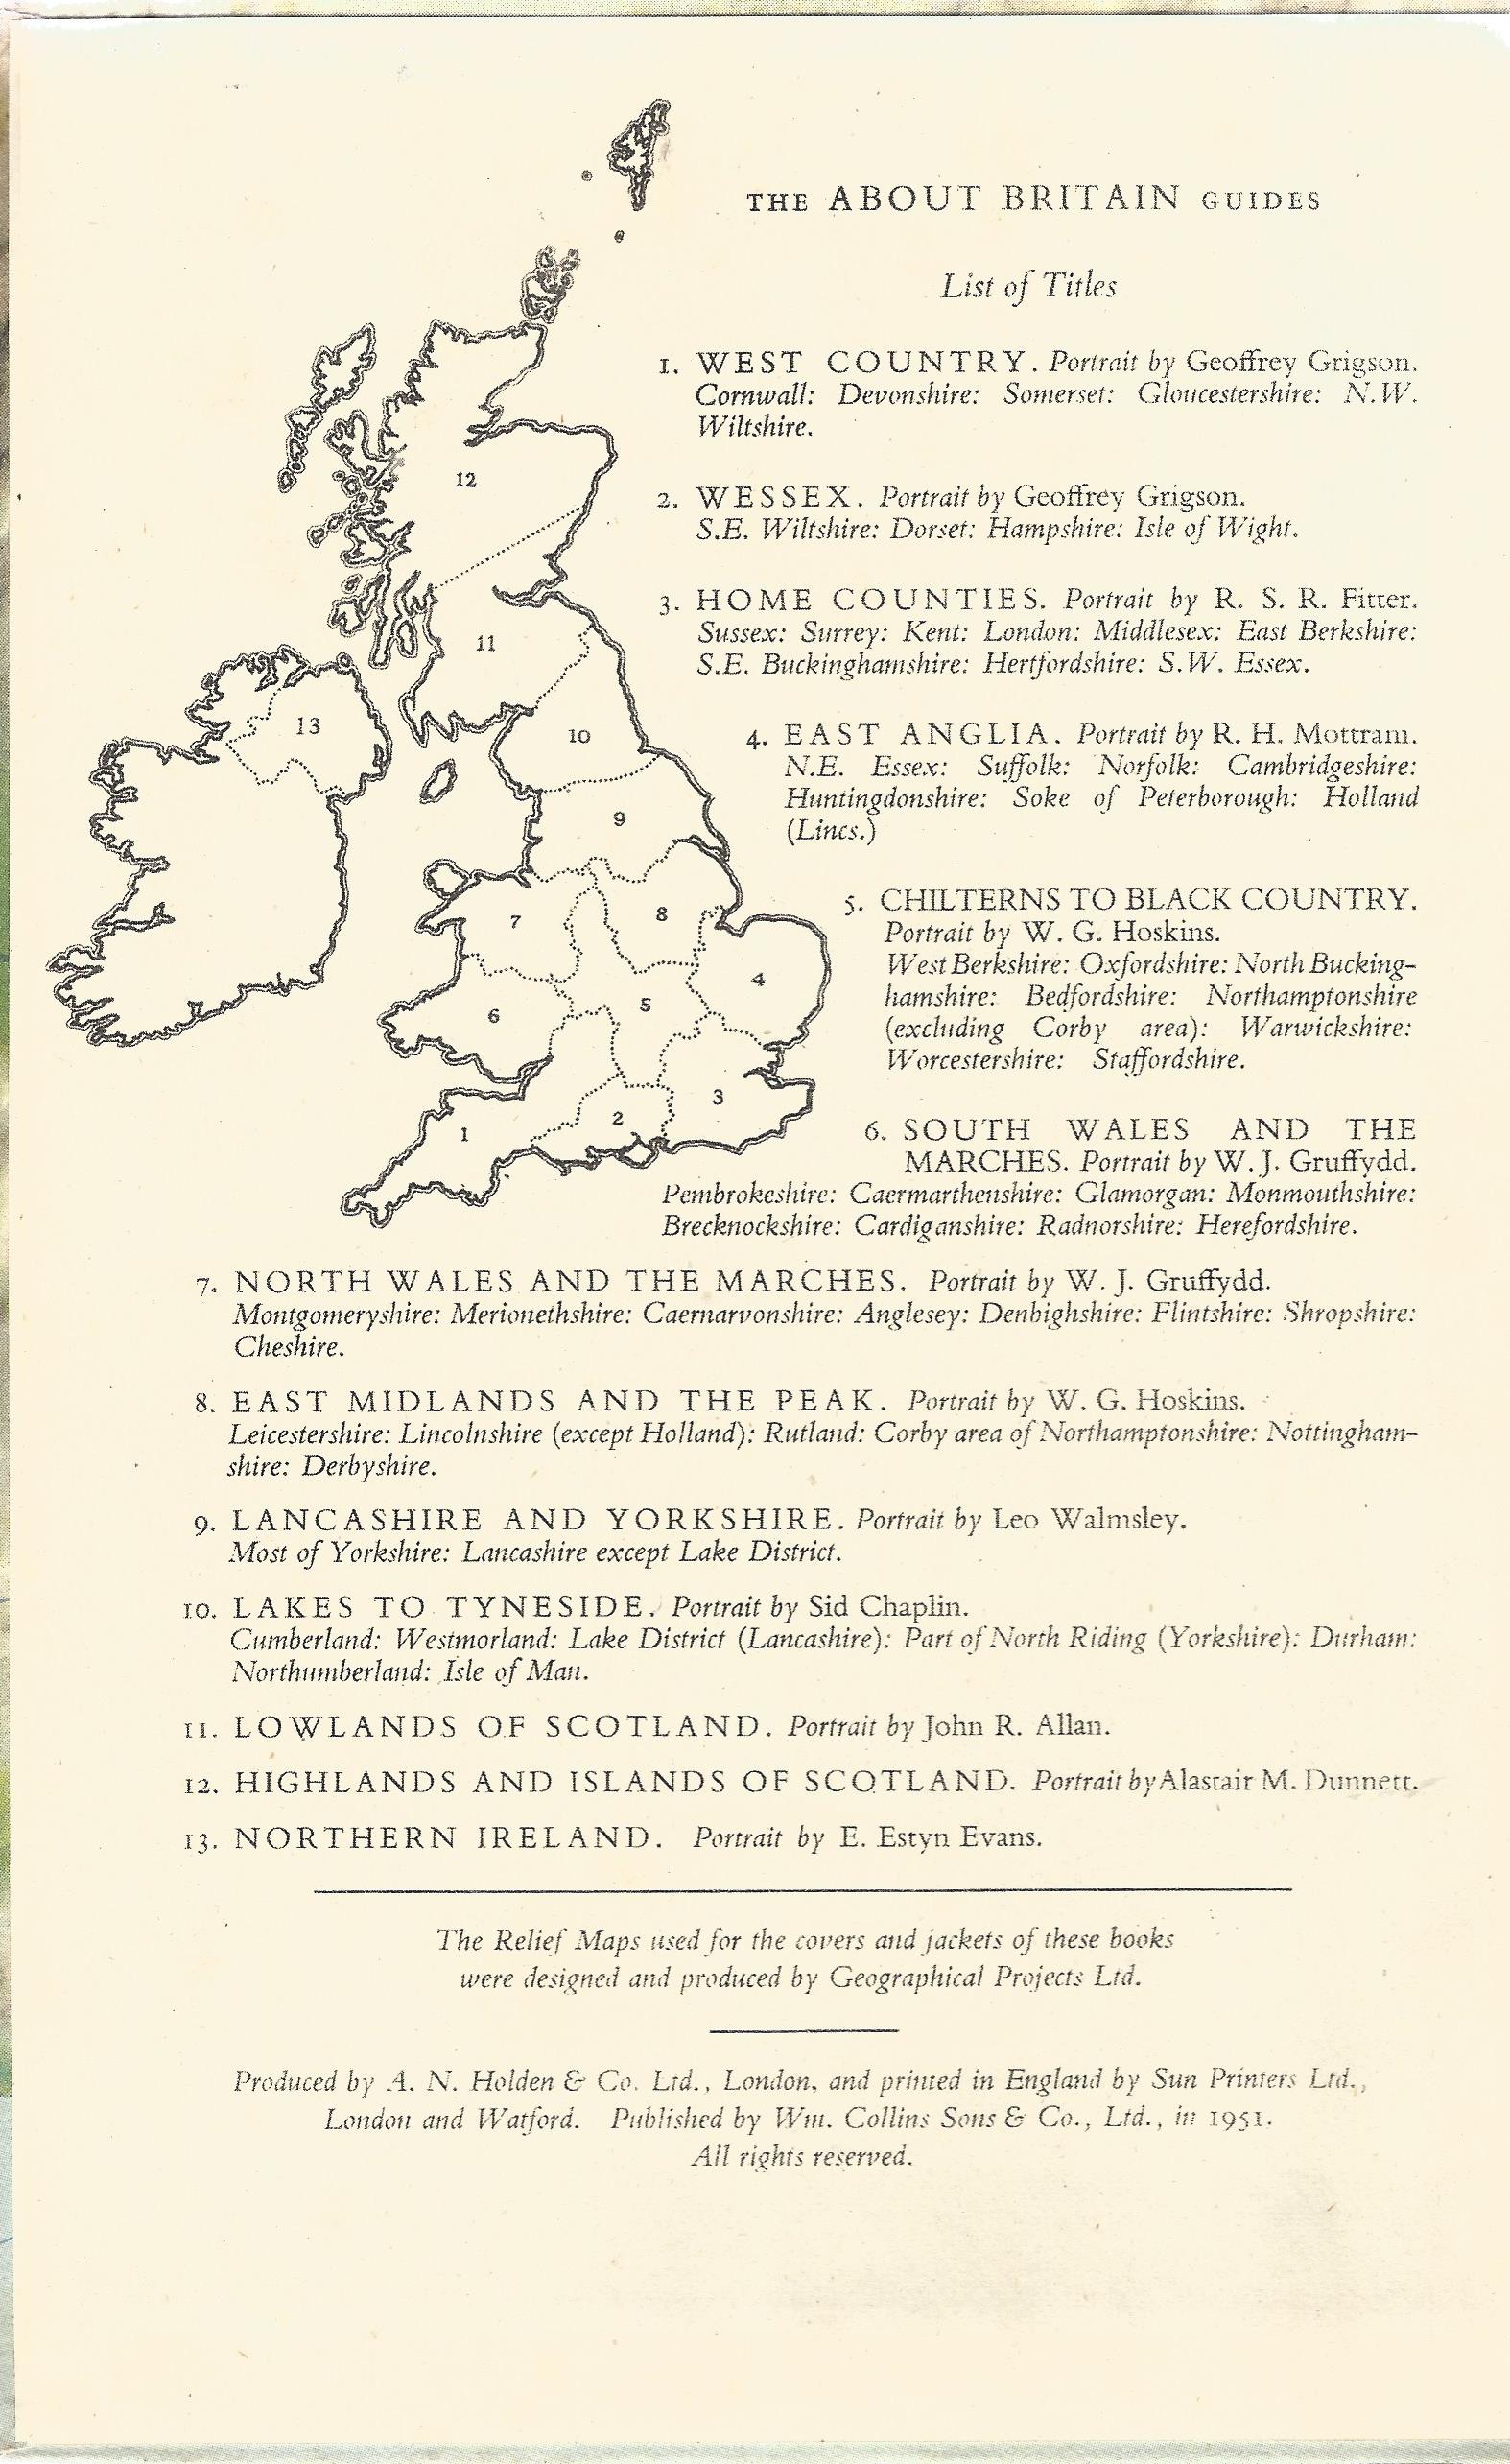 About Britain 9 x Guide Books No's 2,3, 5,6,7,8,9,10,11, edited by G Grigson 1951 First Editions - Image 4 of 4